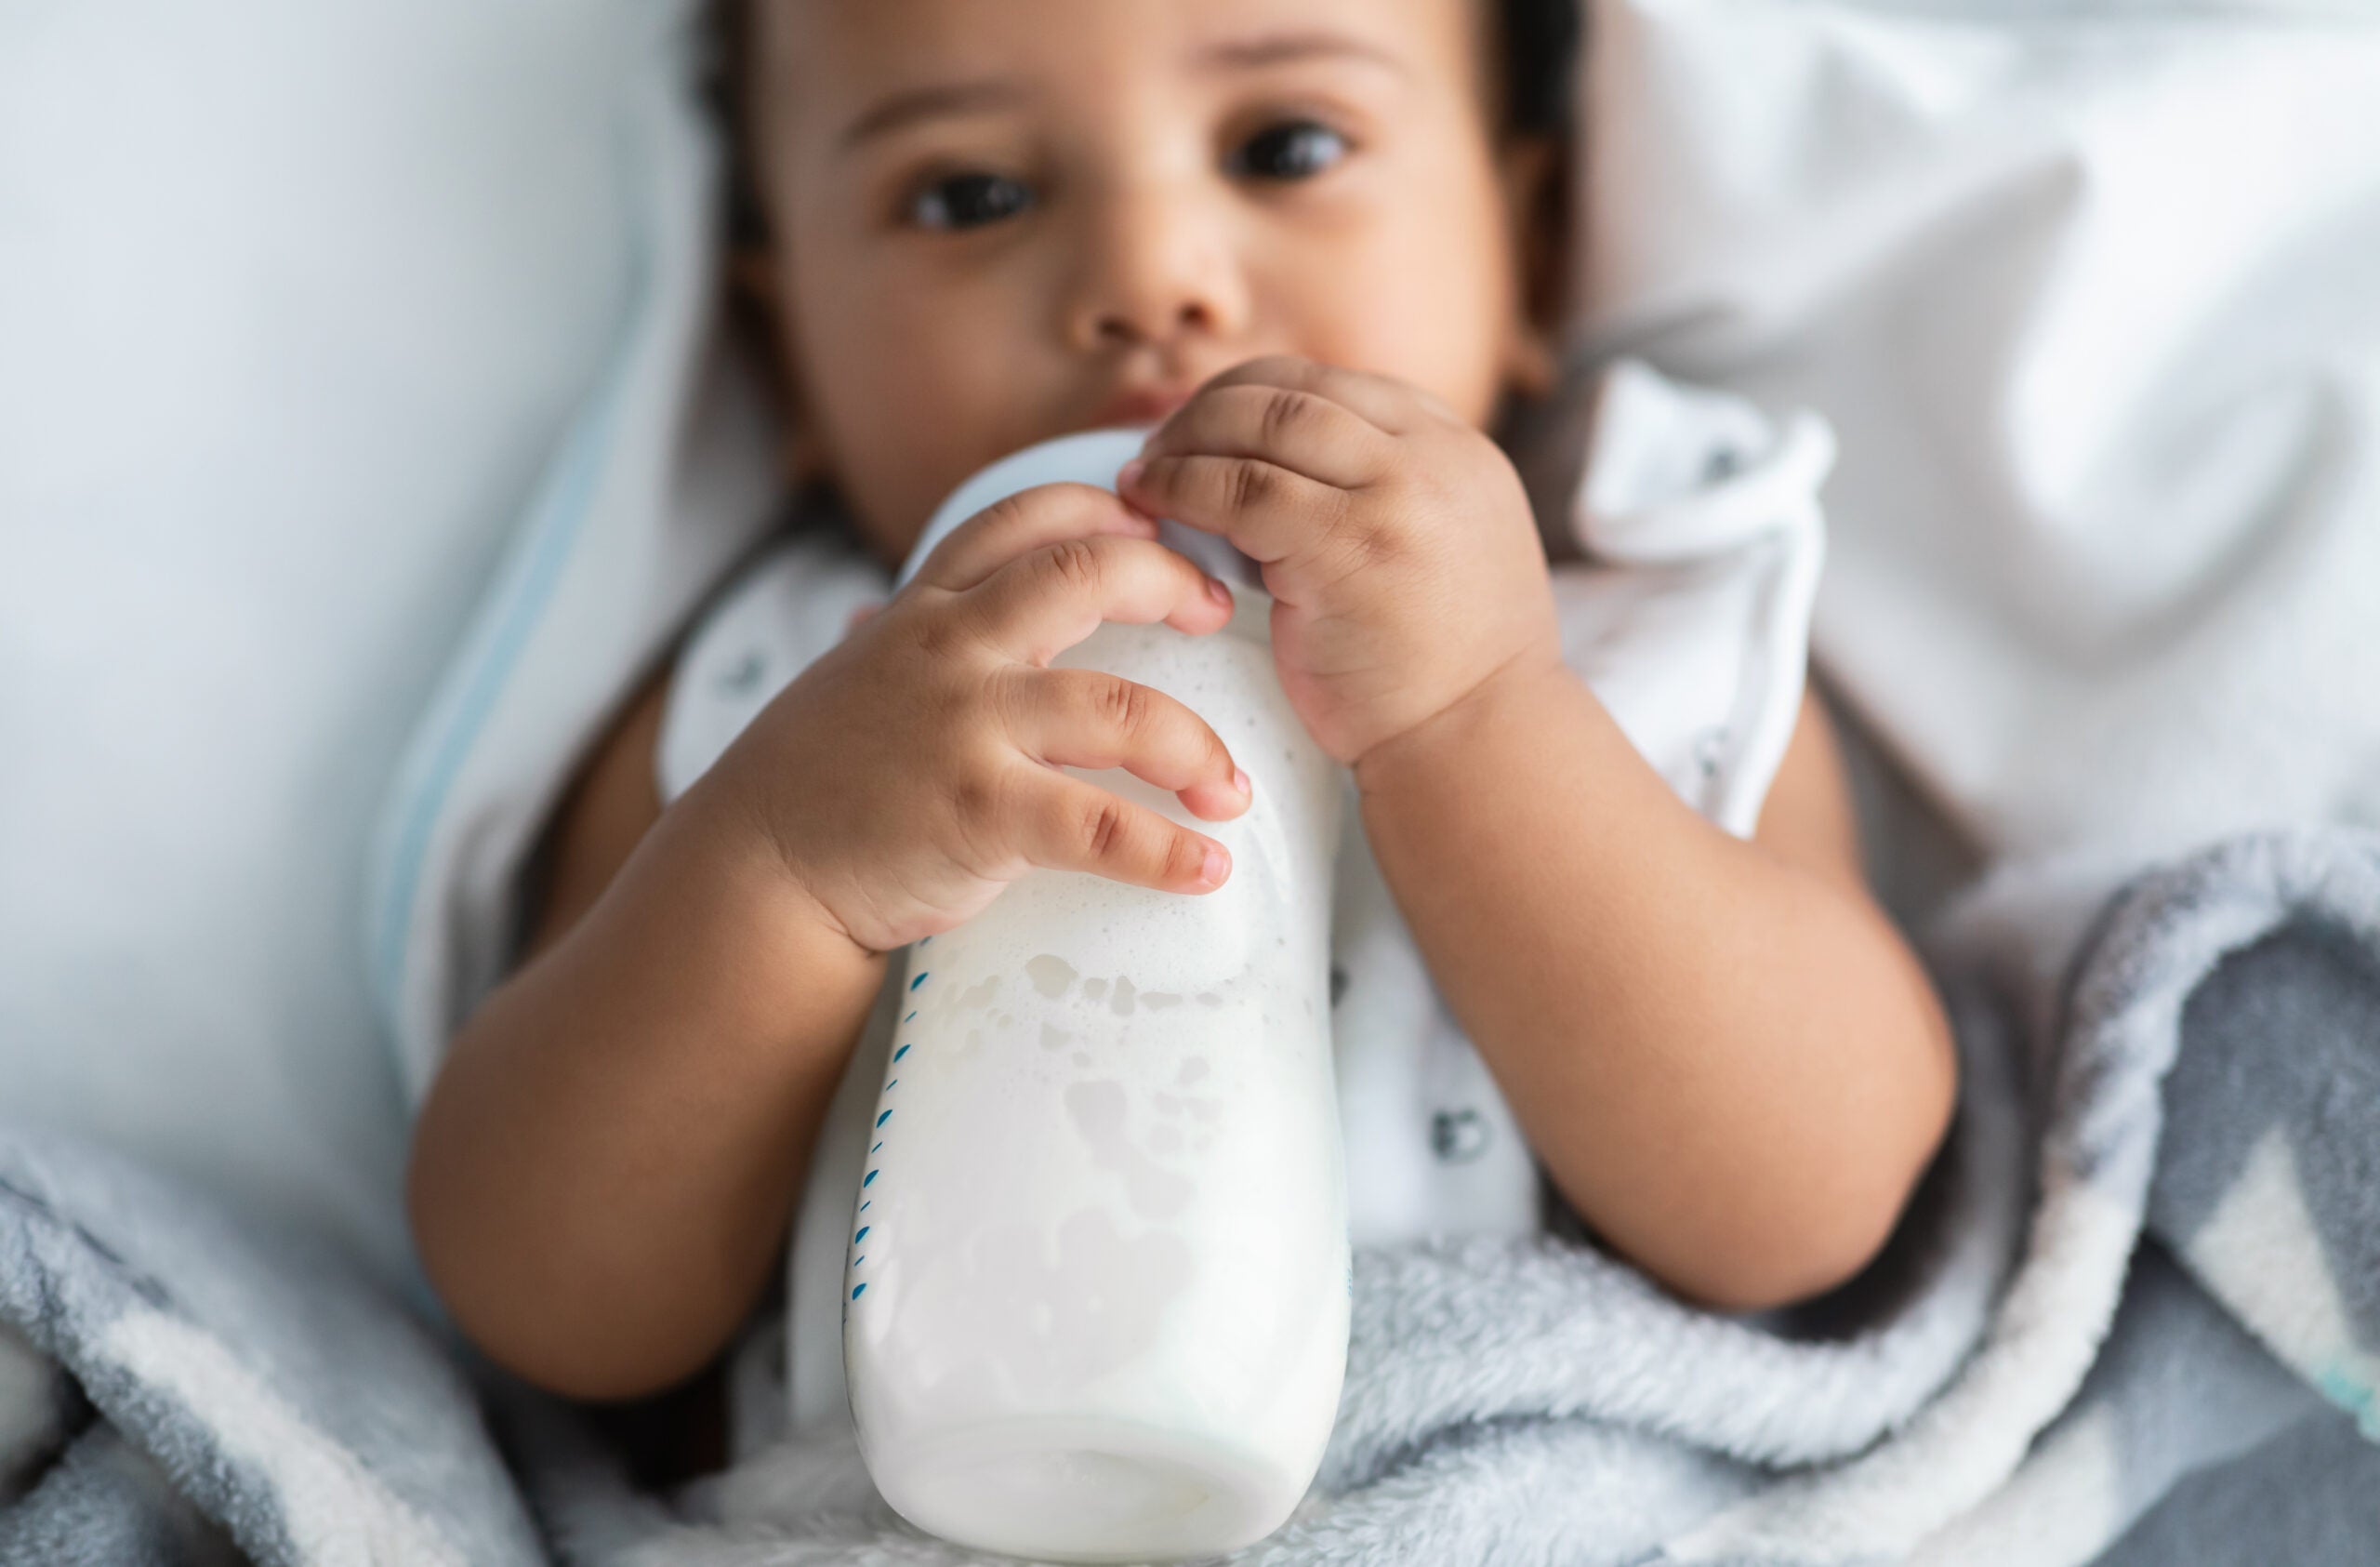 Important Things To Remember When Storing and Thawing Breast Milk